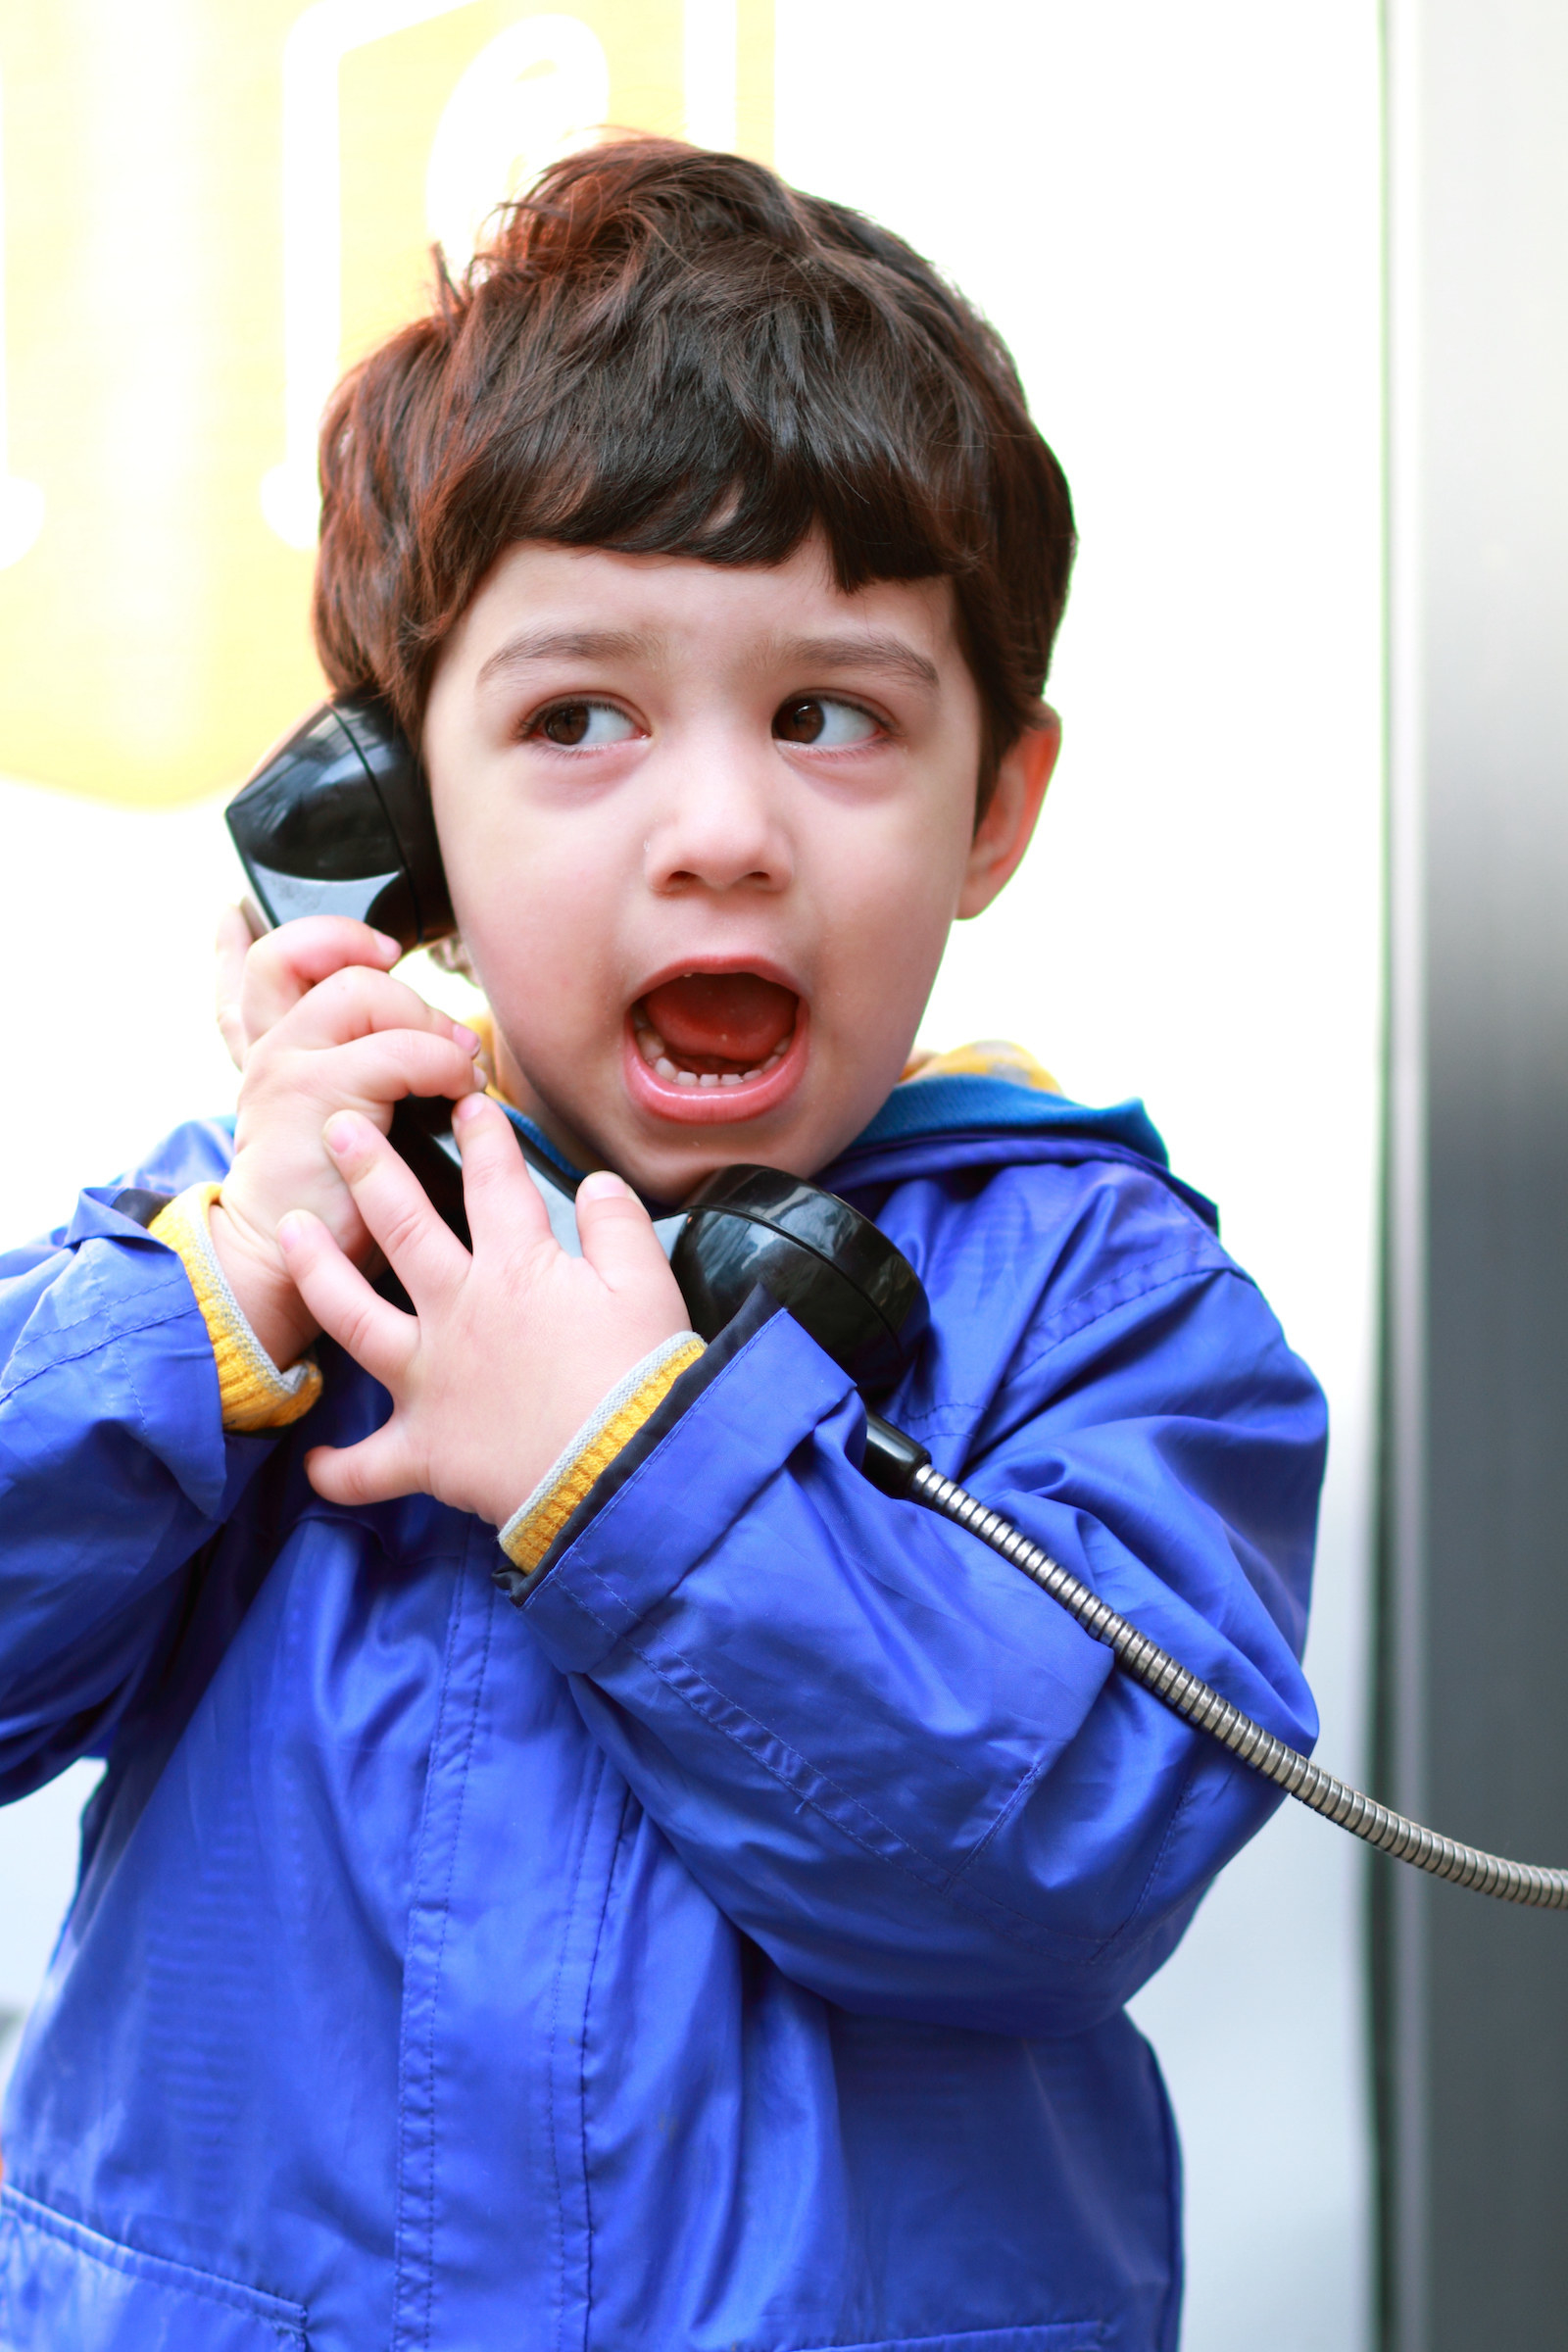 Young boy on a corded phone